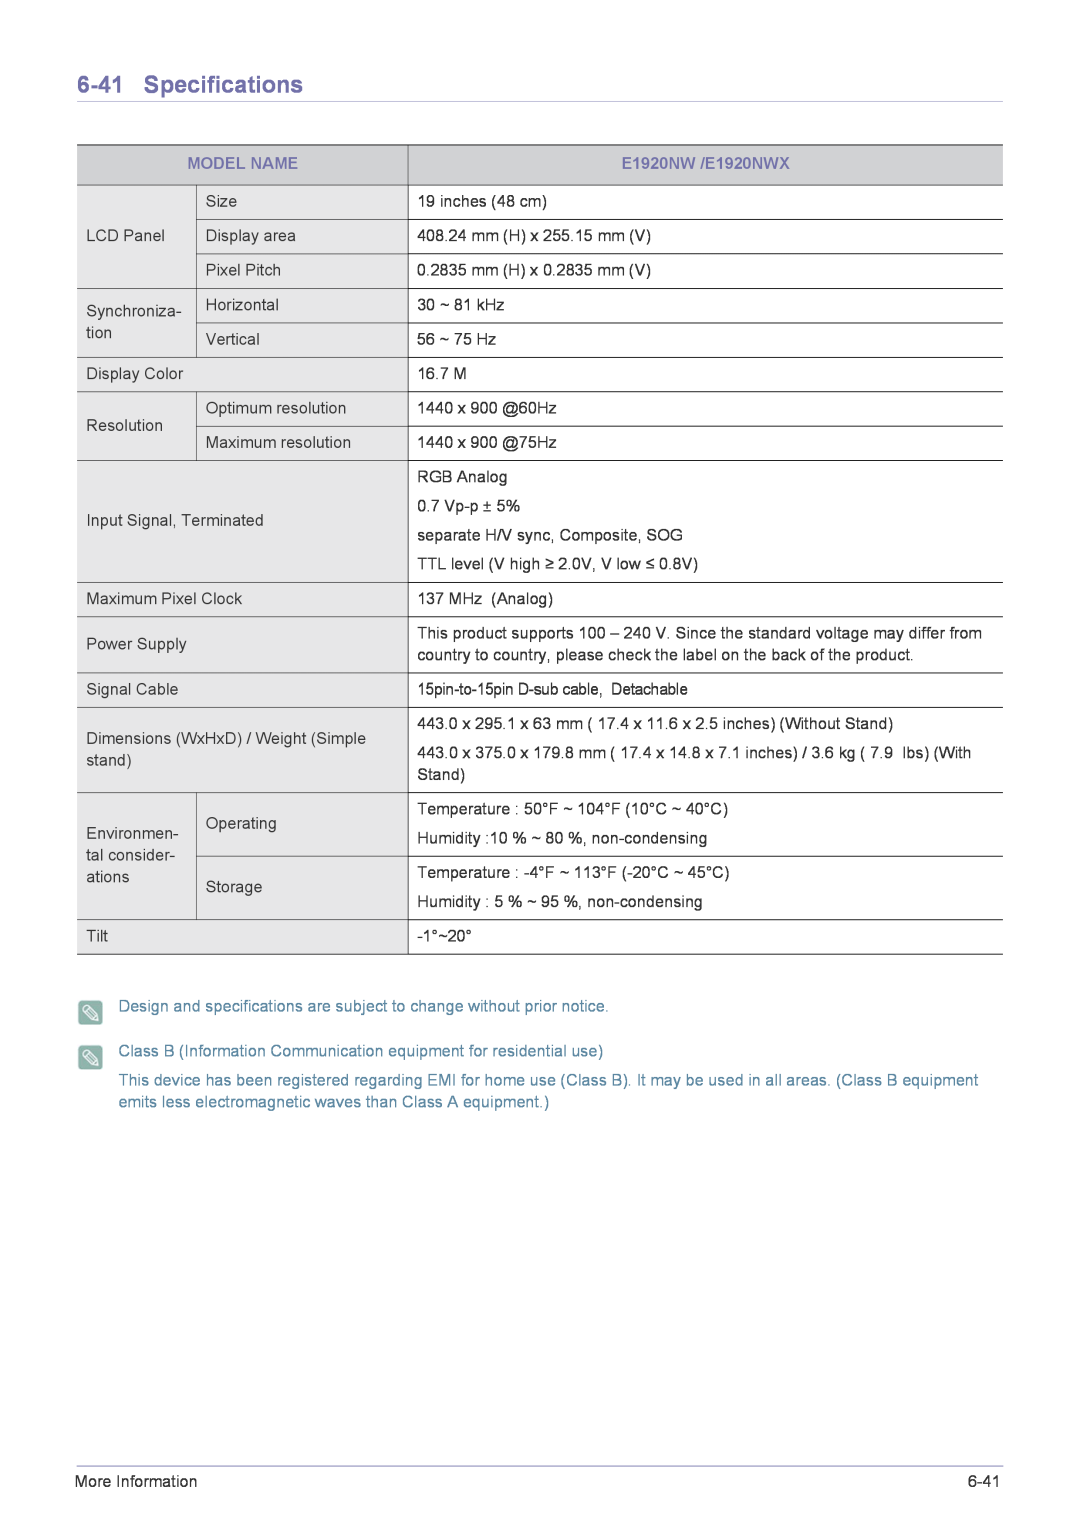 Samsung B2240MWX user manual Specifications, Model Name, E1920NW /E1920NWX 